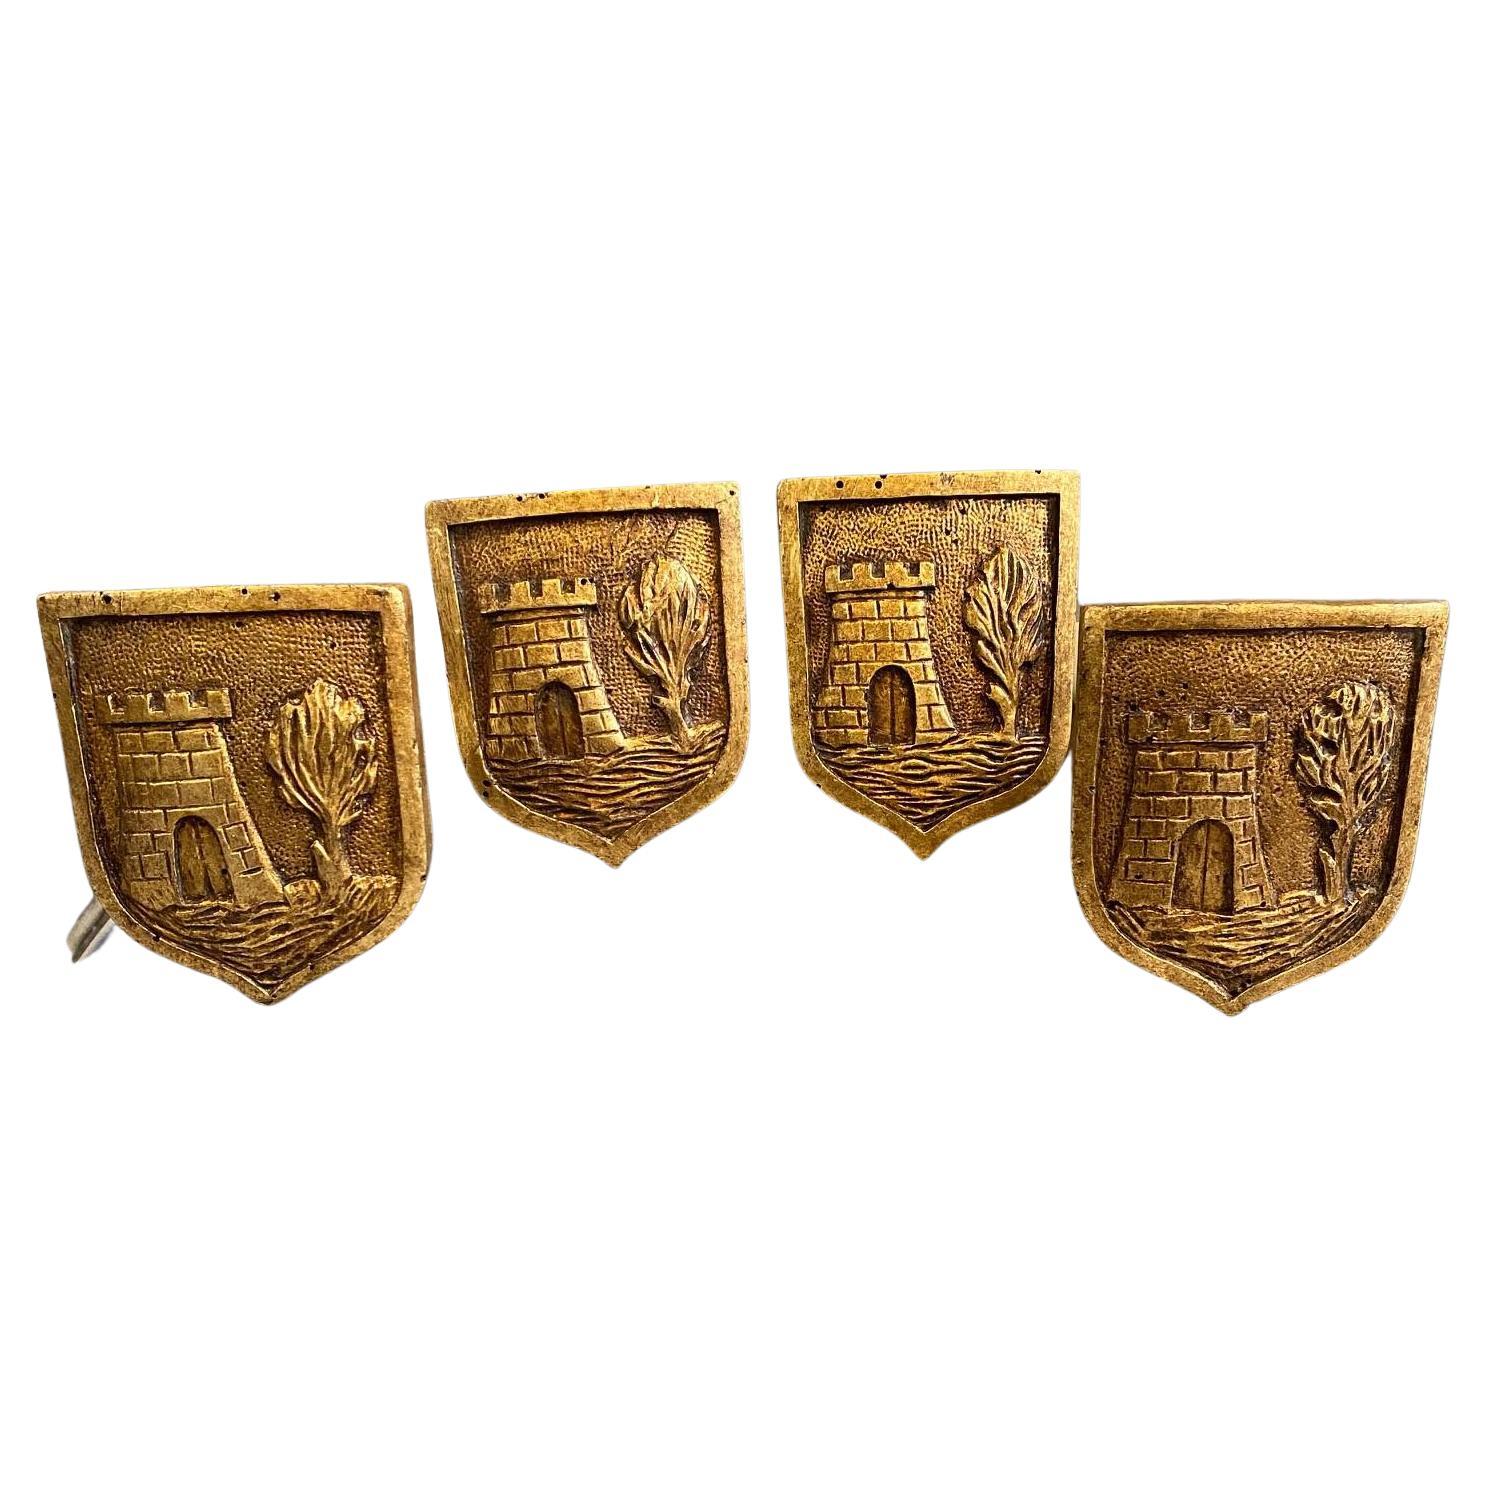 Set of four Early 19th Century Golden and Lacquered Wooden Curtain Holders